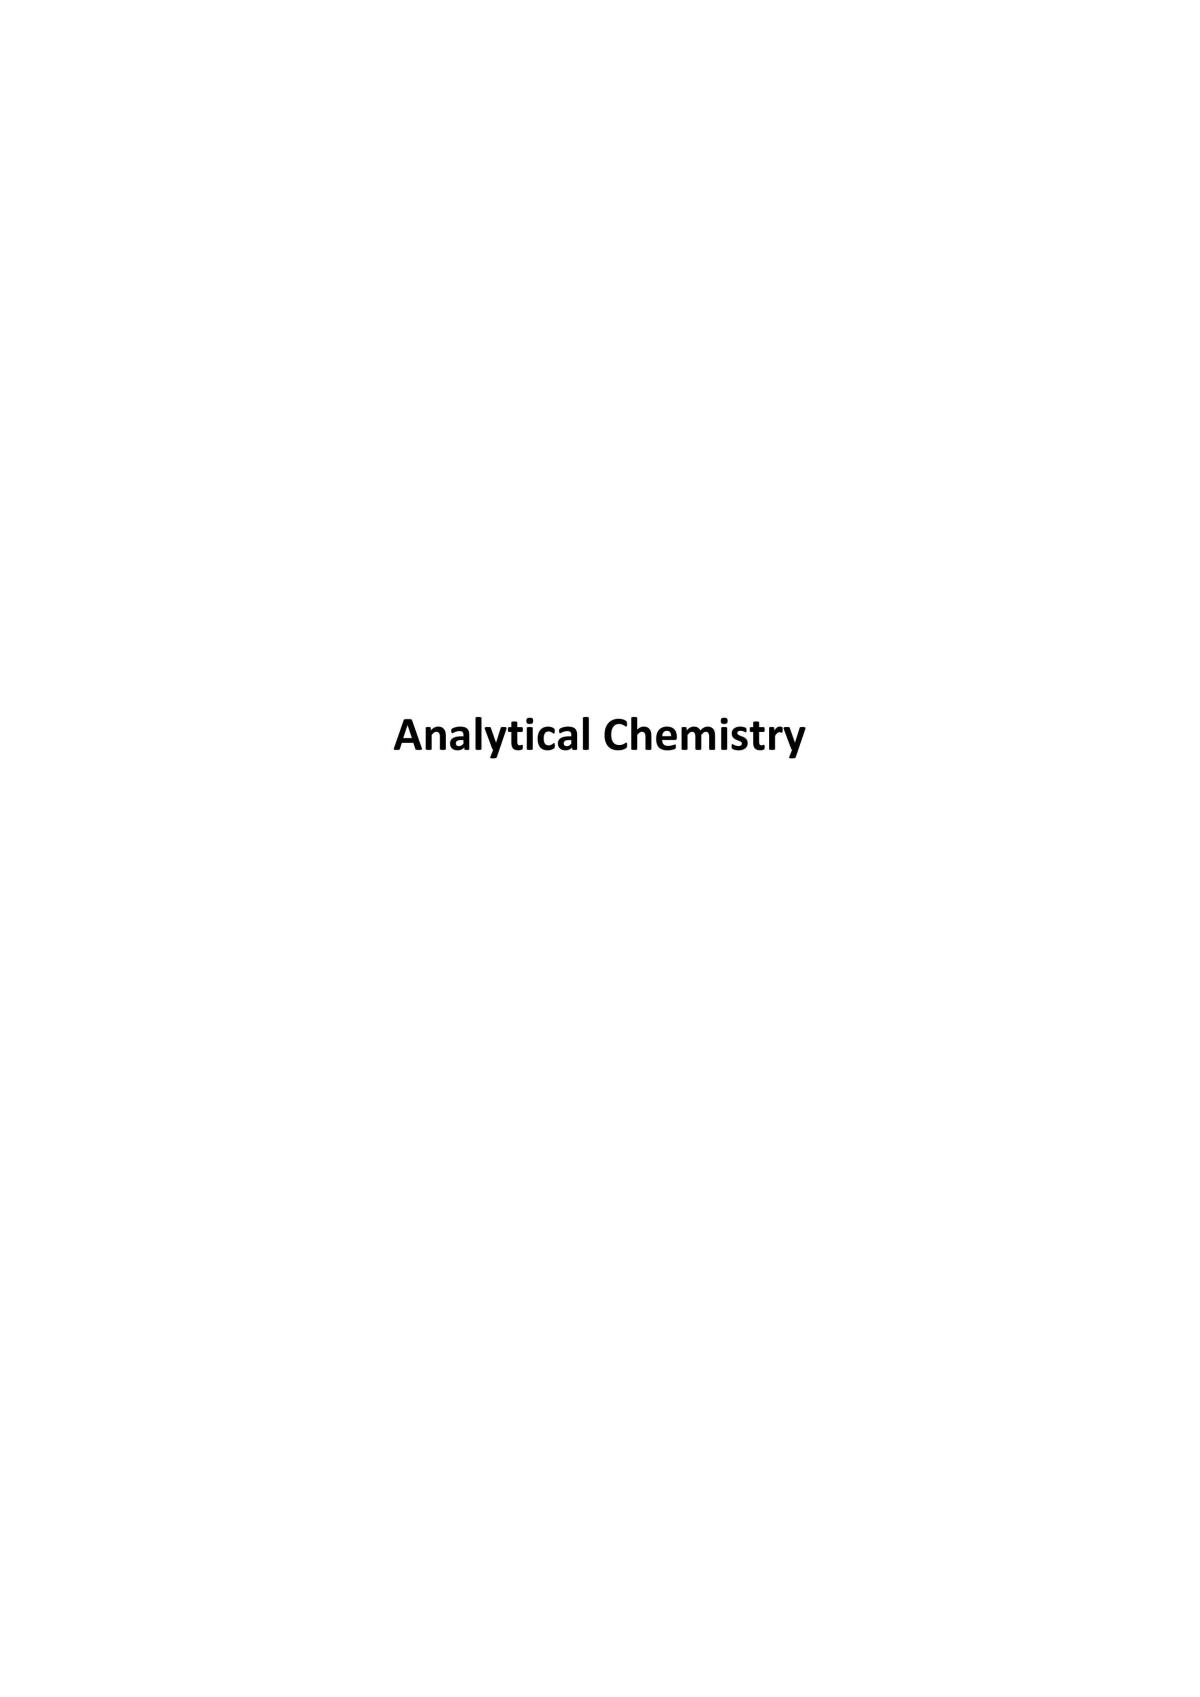 Lecture Notes - EKC 114 Analytical Chemistry - Page 1